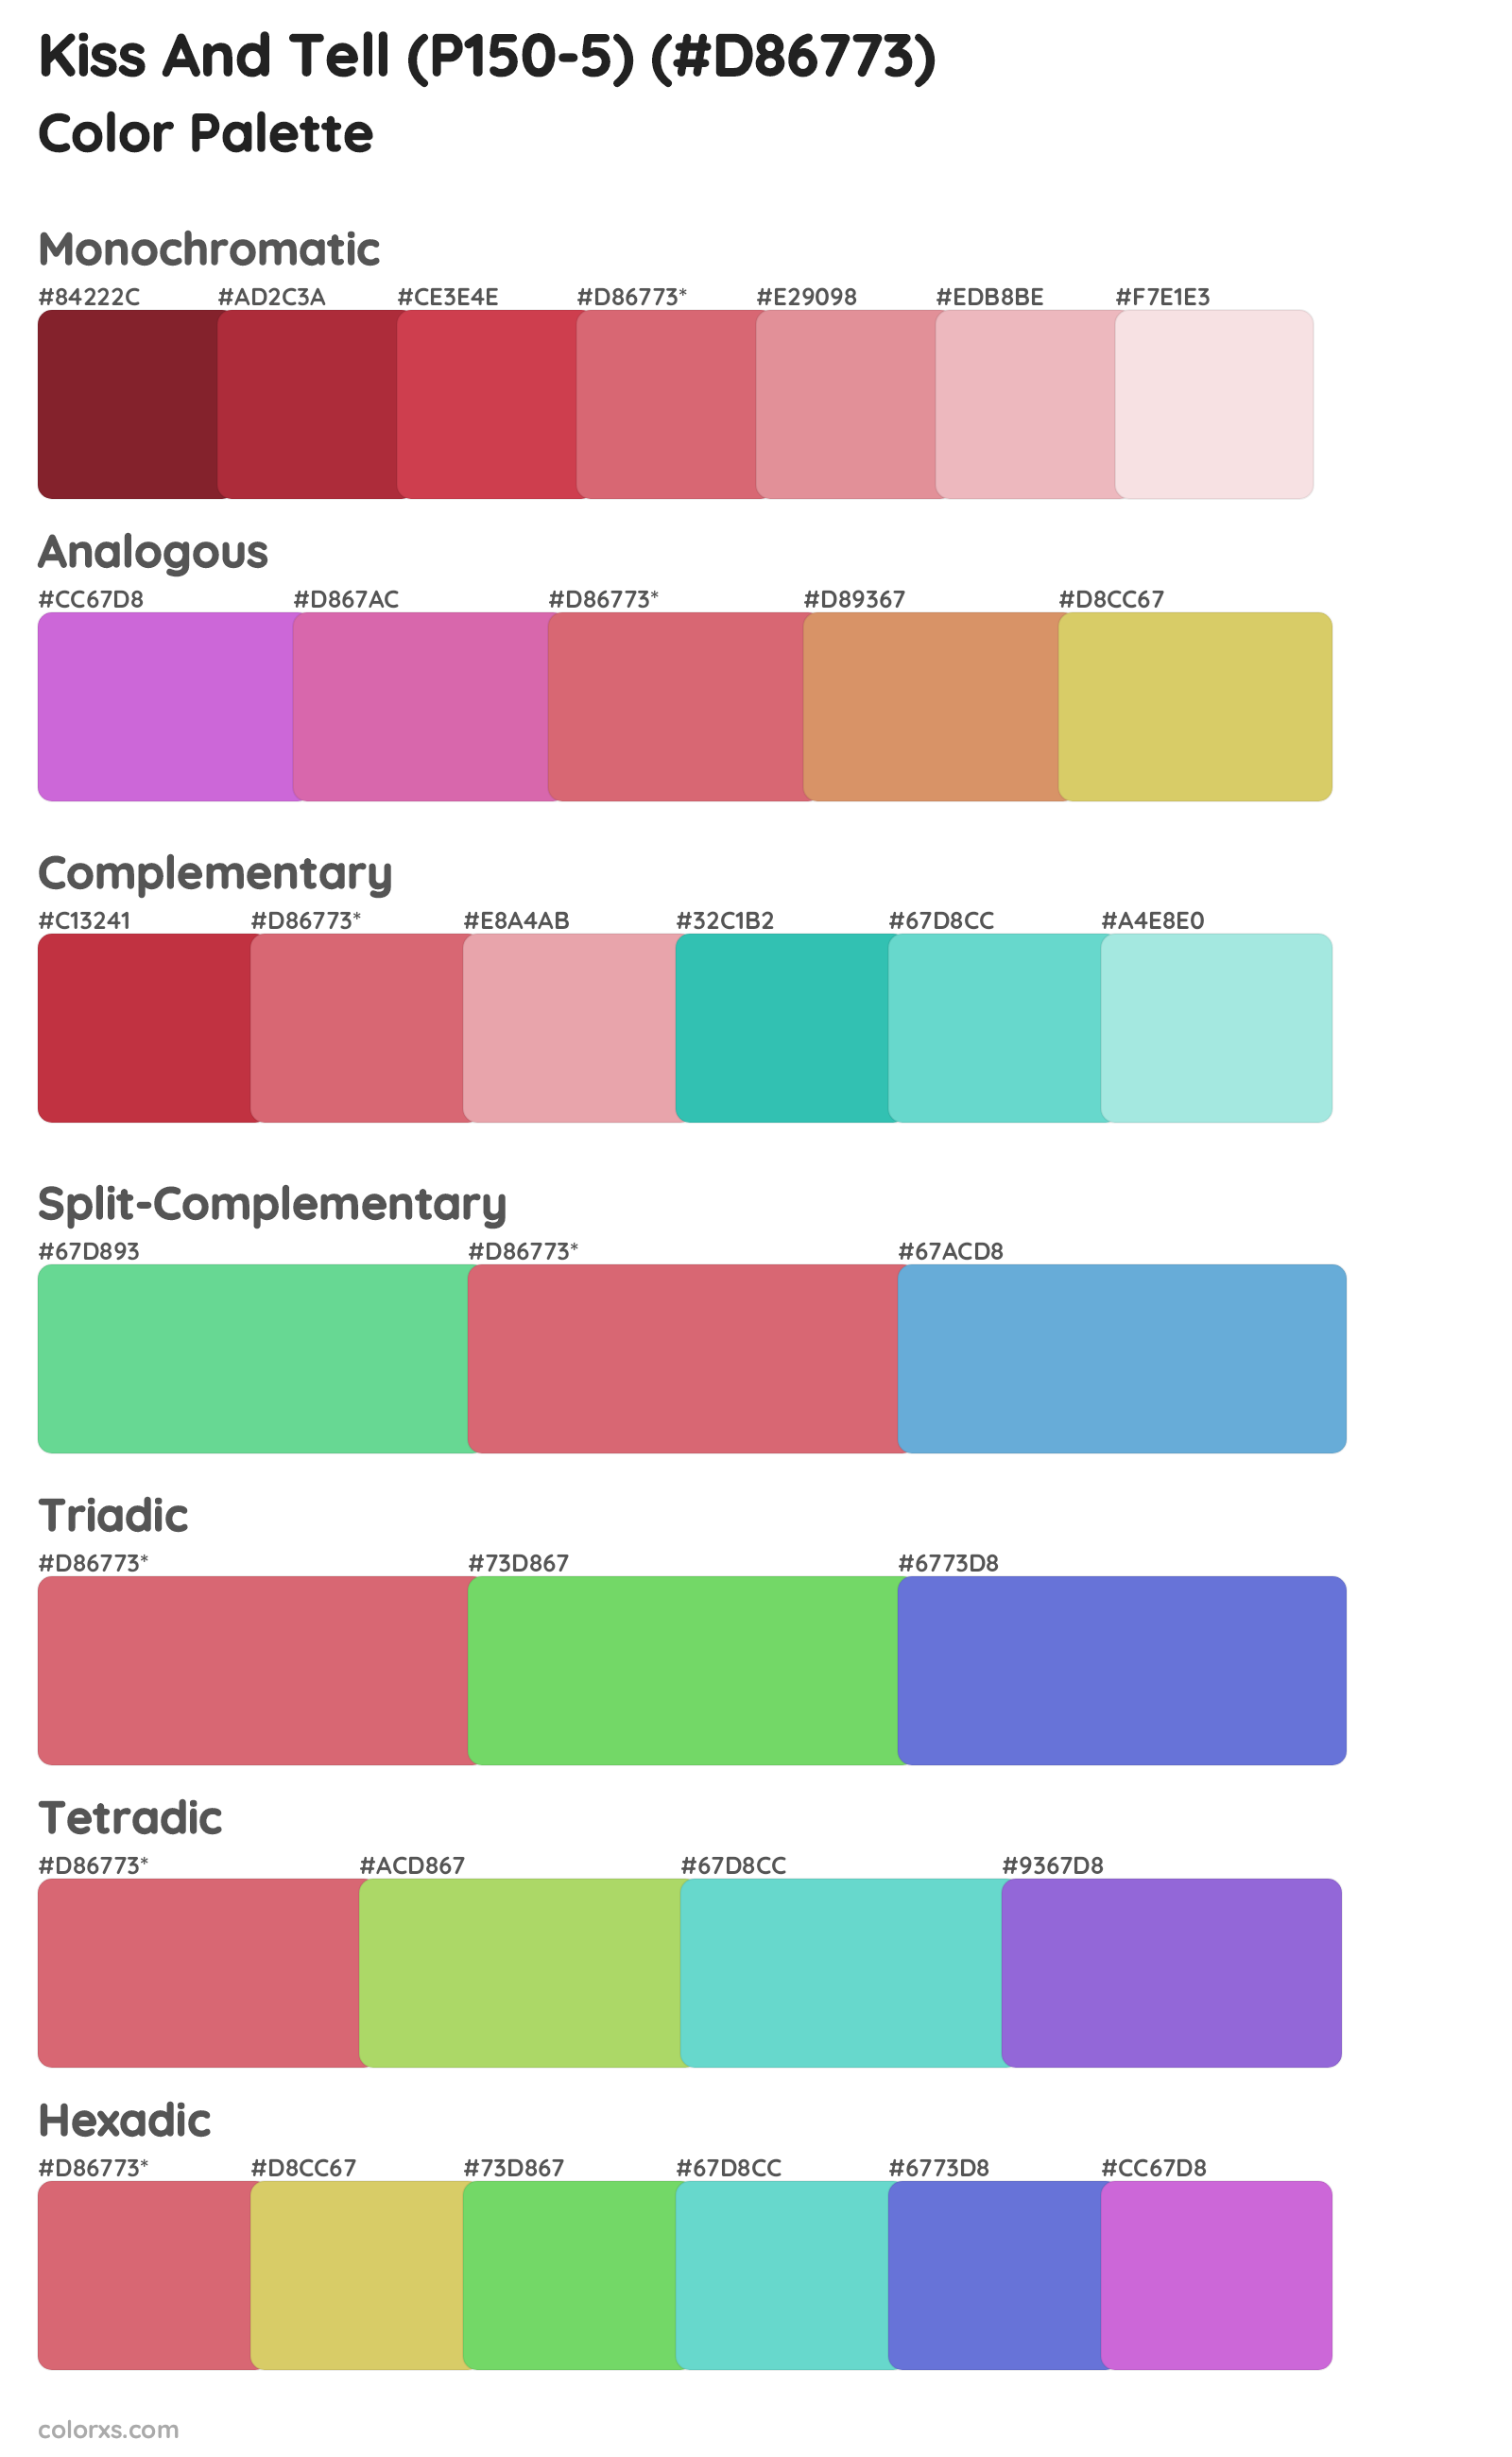 Kiss And Tell (P150-5) Color Scheme Palettes